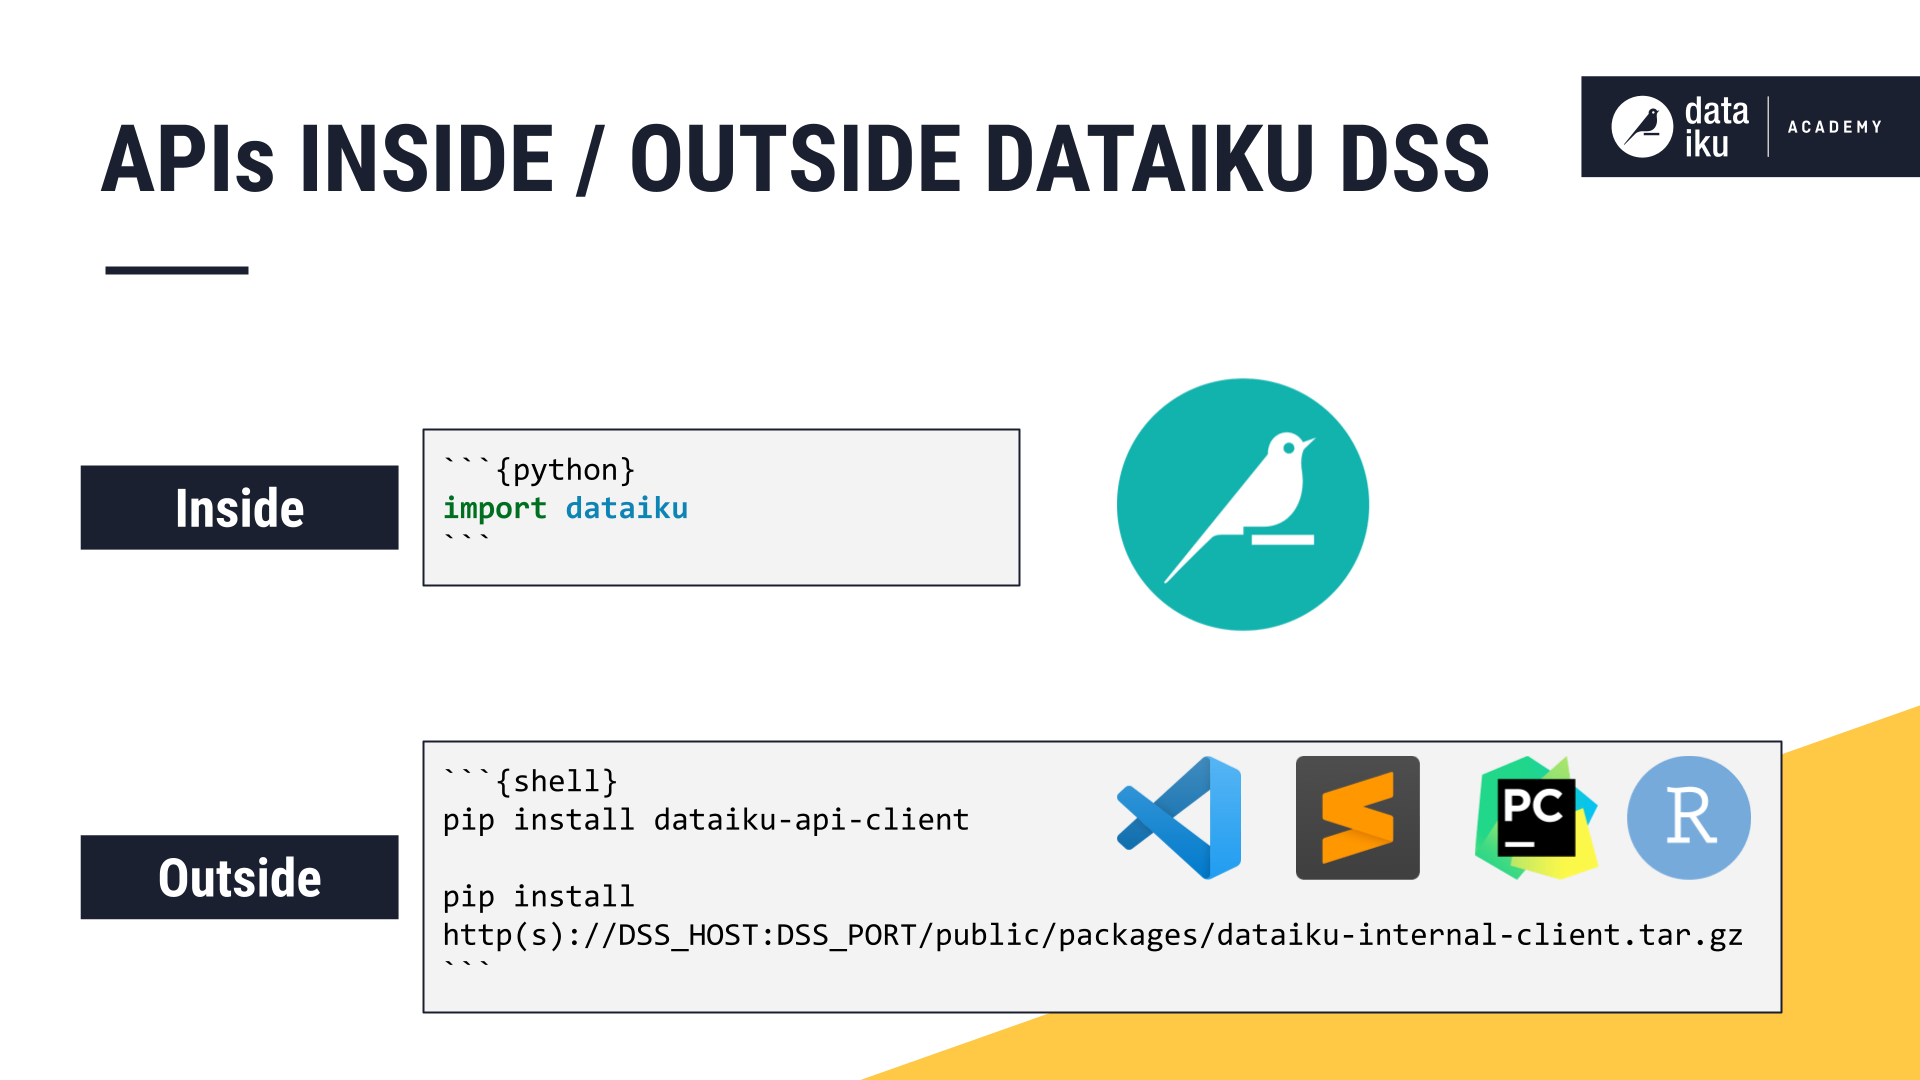 A slide introducing how Dataiku APIs can be used inside or outside of the platform.